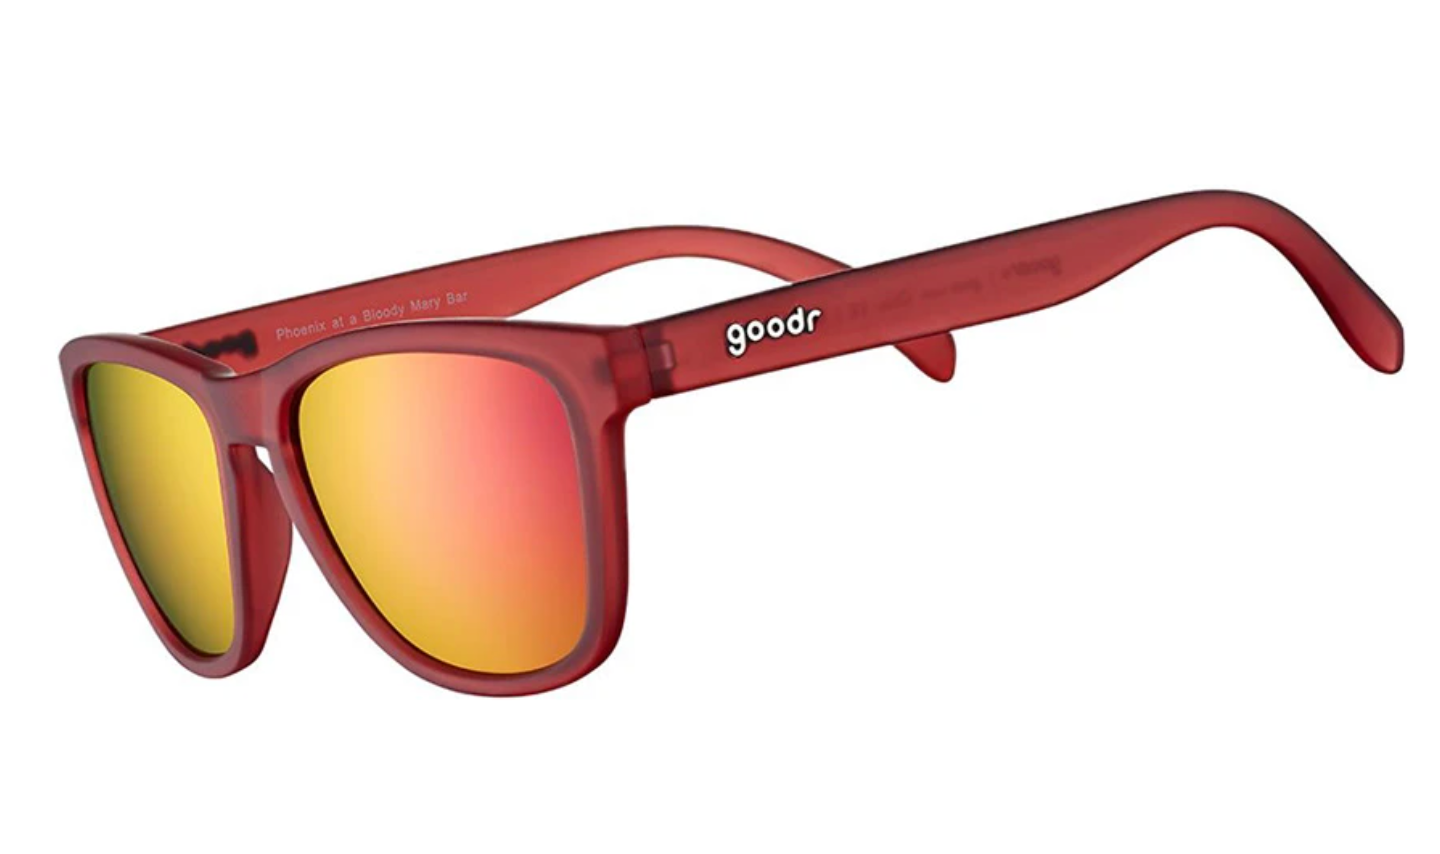 Goodr Sunglasses - The OGs: Phoenix at a Bloody Mary Bar